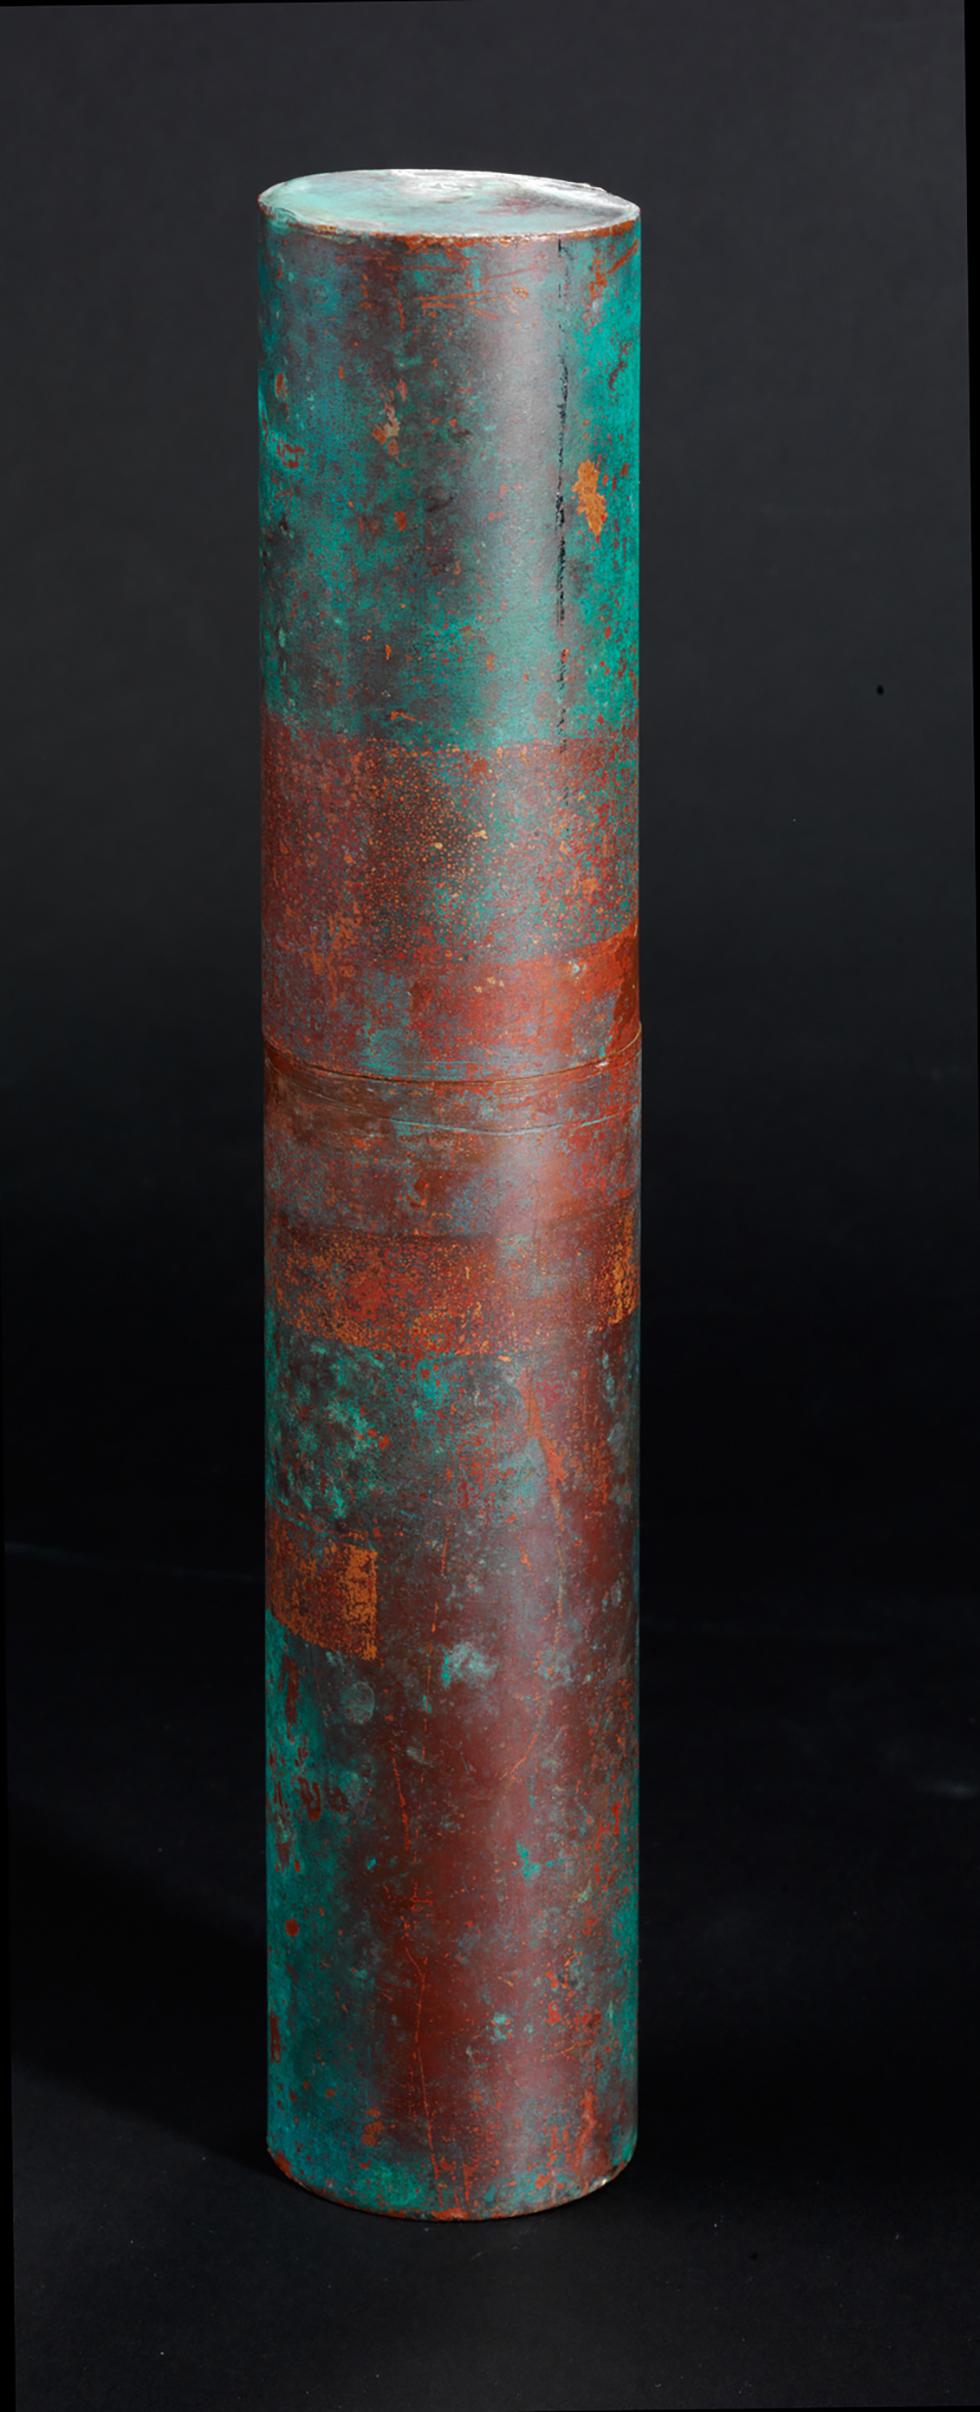 Proclamation cylinder which held the sovereignty claim.